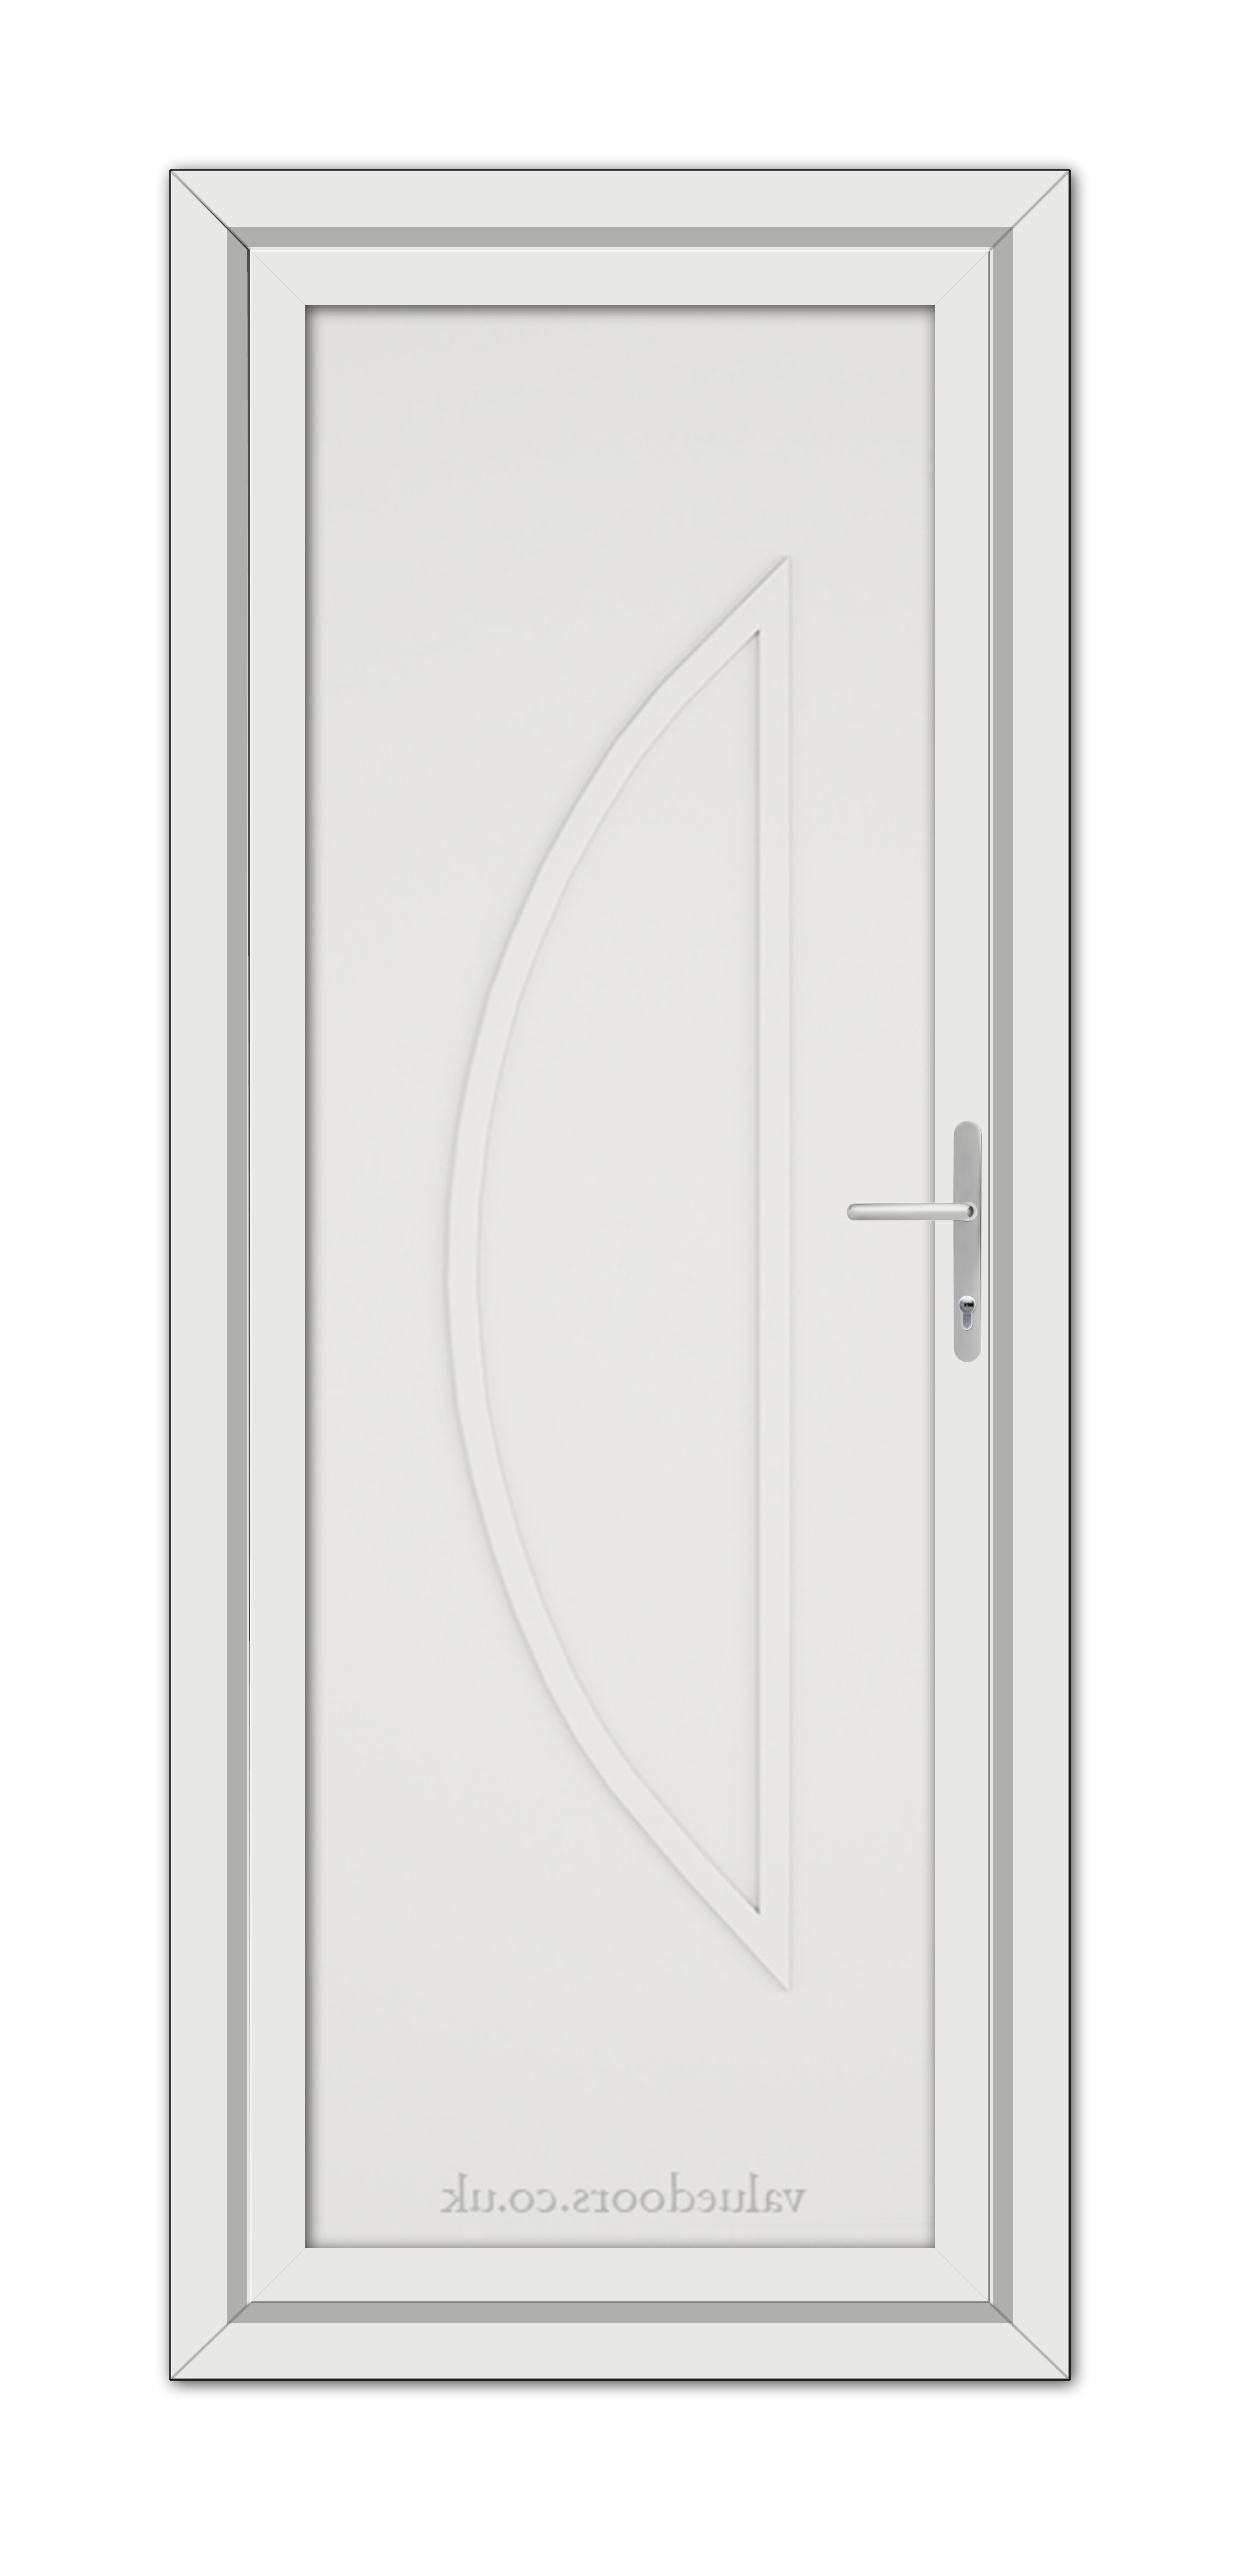 White Modern 5051 Solid uPVC Door with a curved line design and metallic handle, set within a door frame.